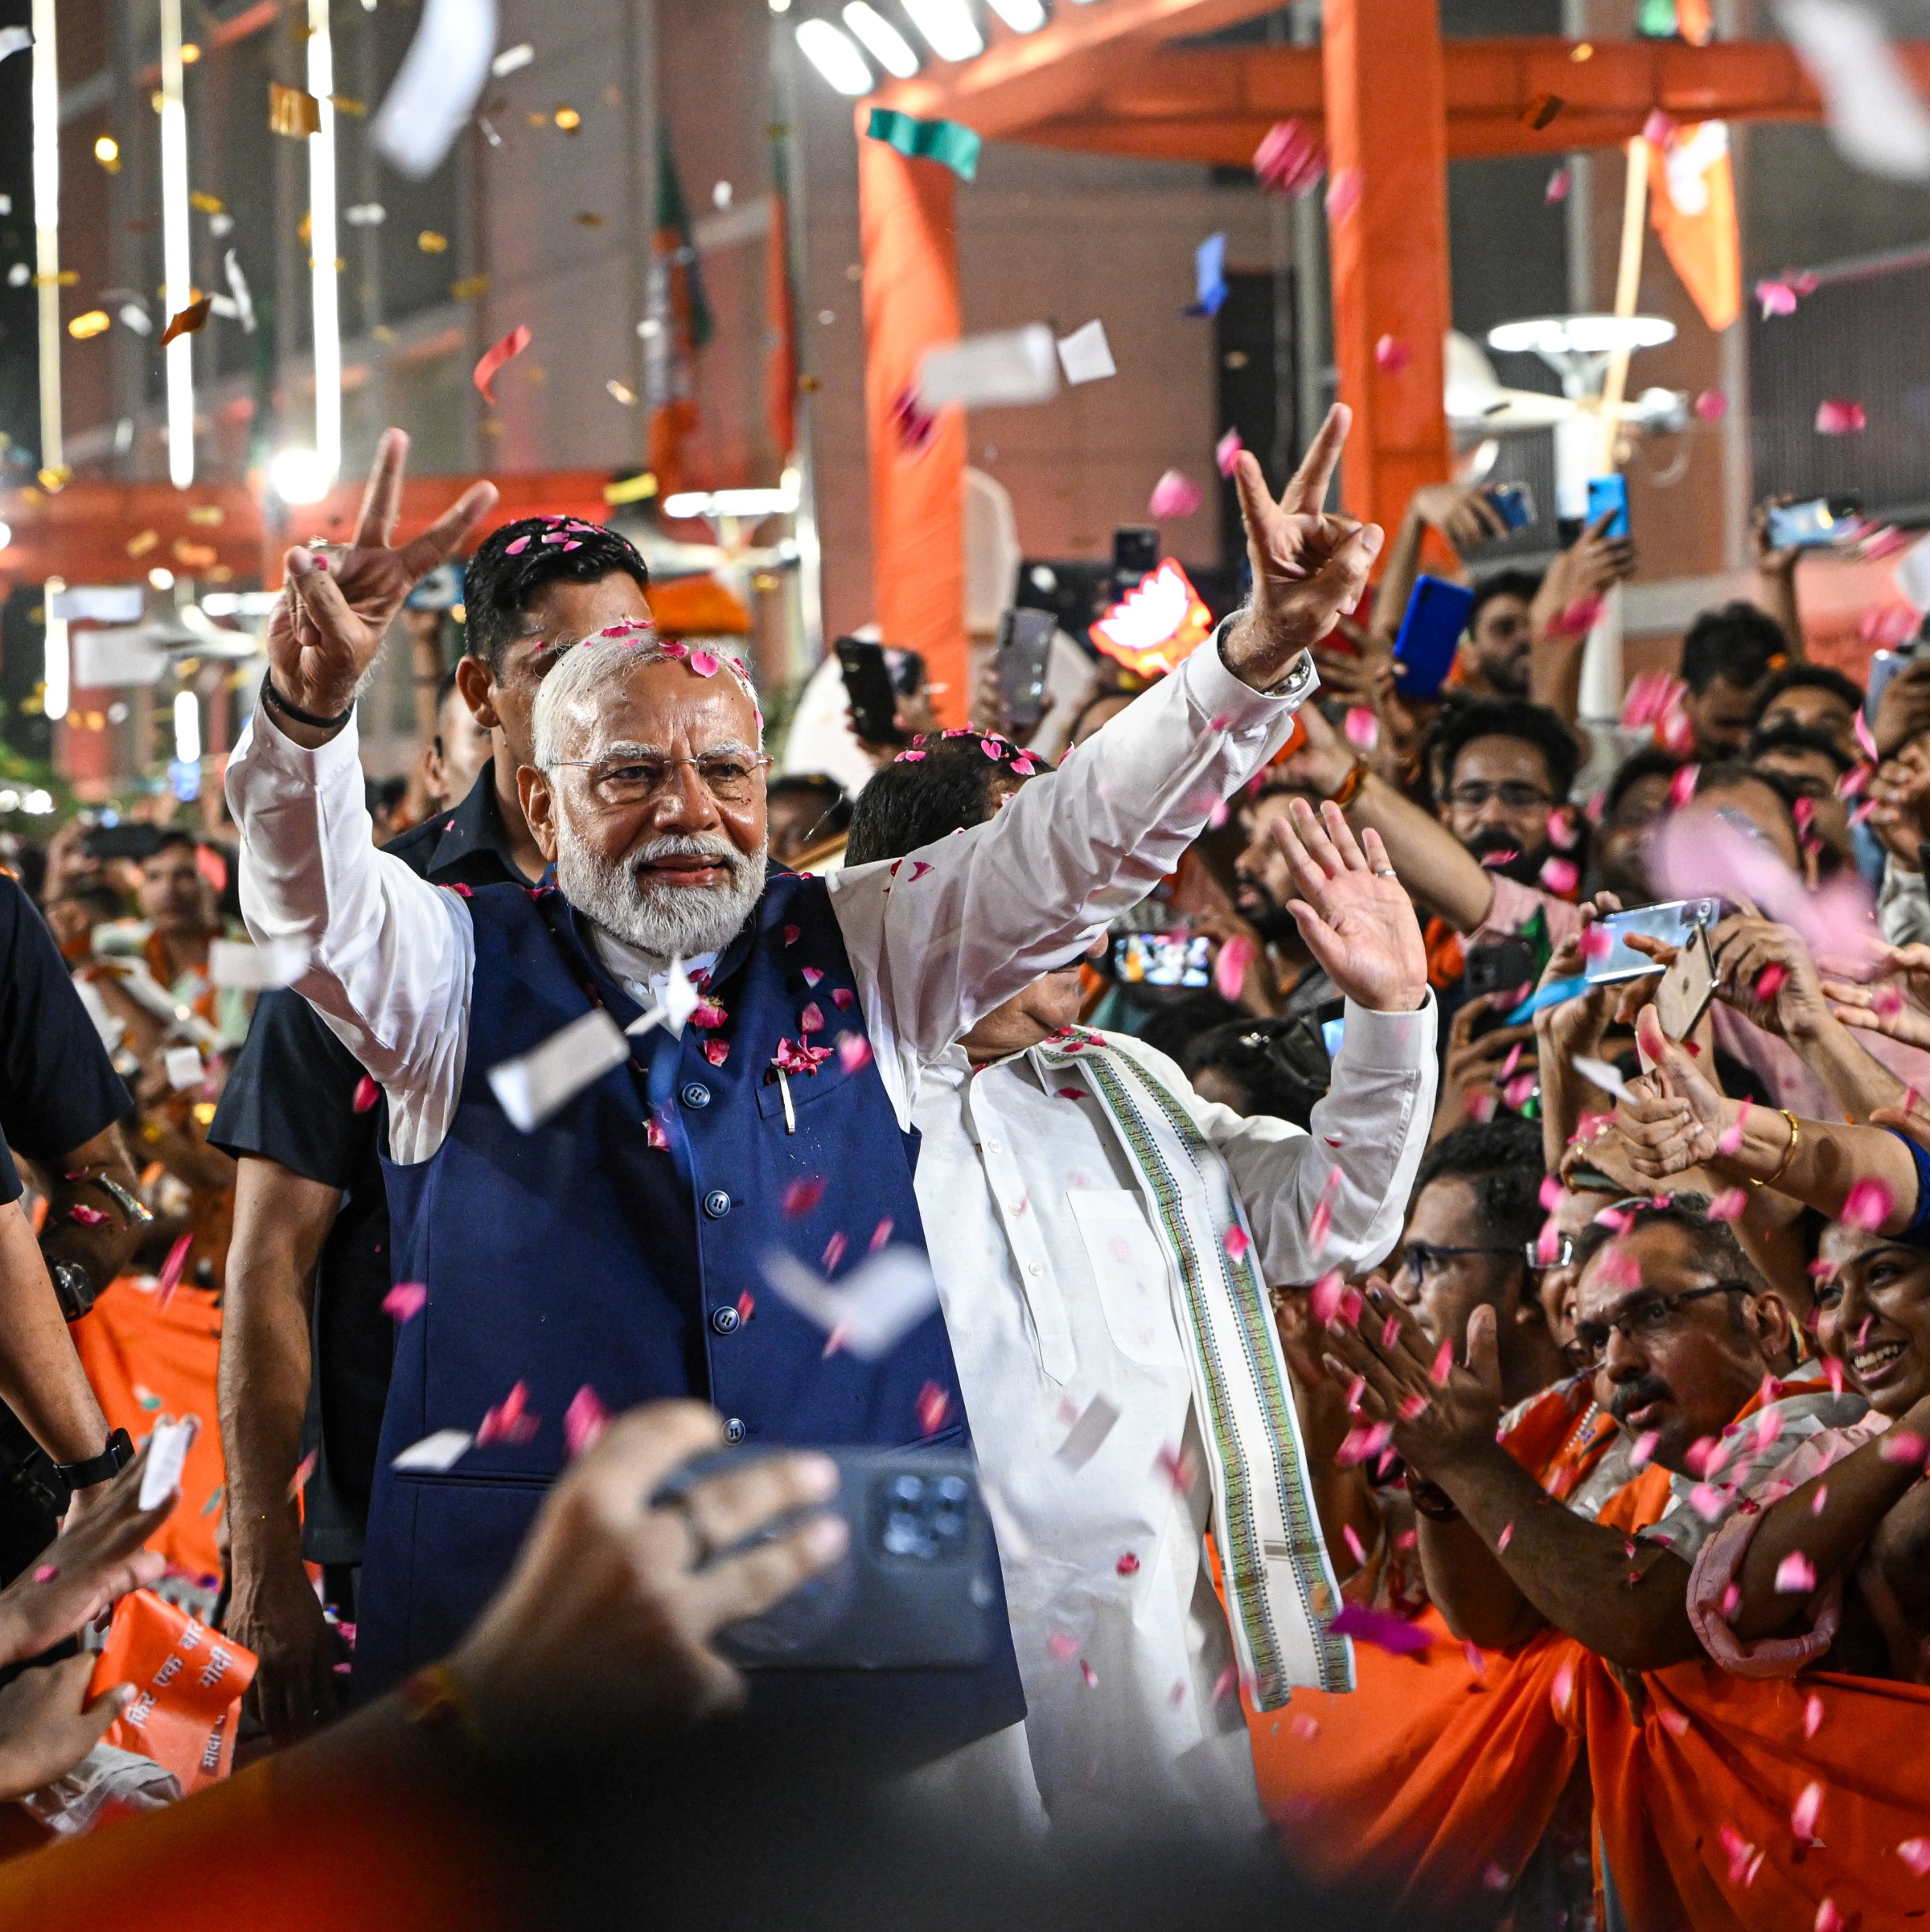 Modi won the Indian election. So why does it seem like he lost?